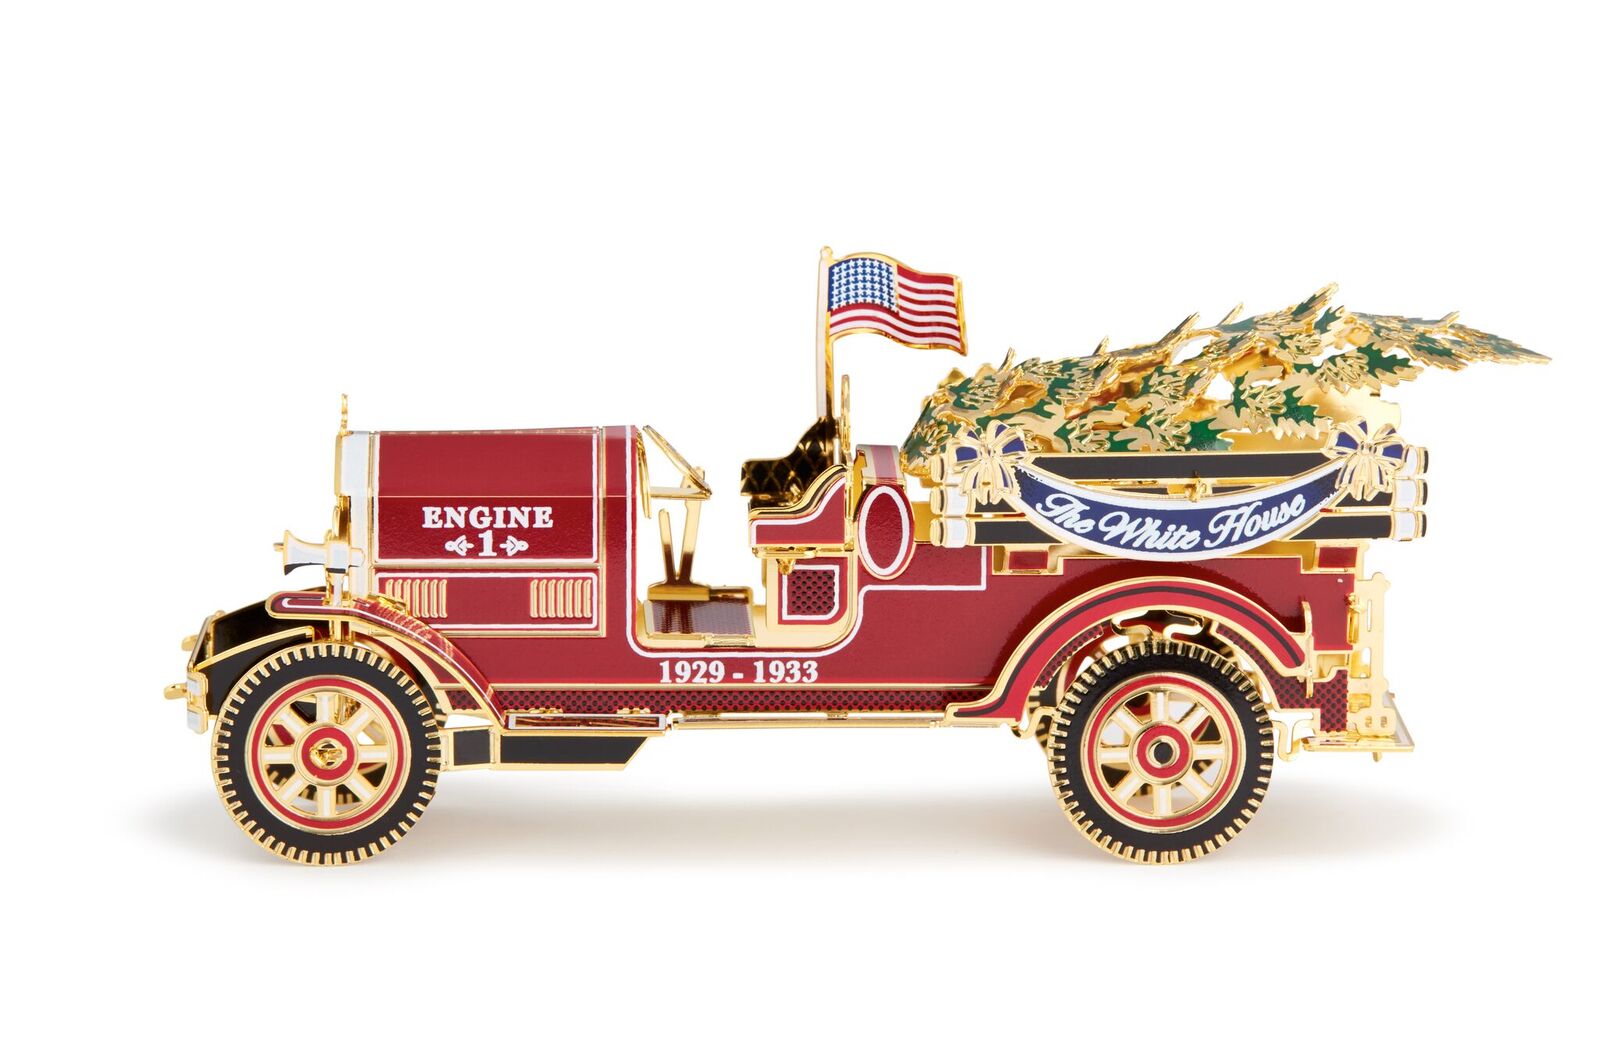 The White House Historical Association released the new 2016 White House Christmas Tree Ornament: a fire truck to commemorate the fire fighters who put out the West Wing Christmas Eve Fire in 1929. (The White House Historical Association)